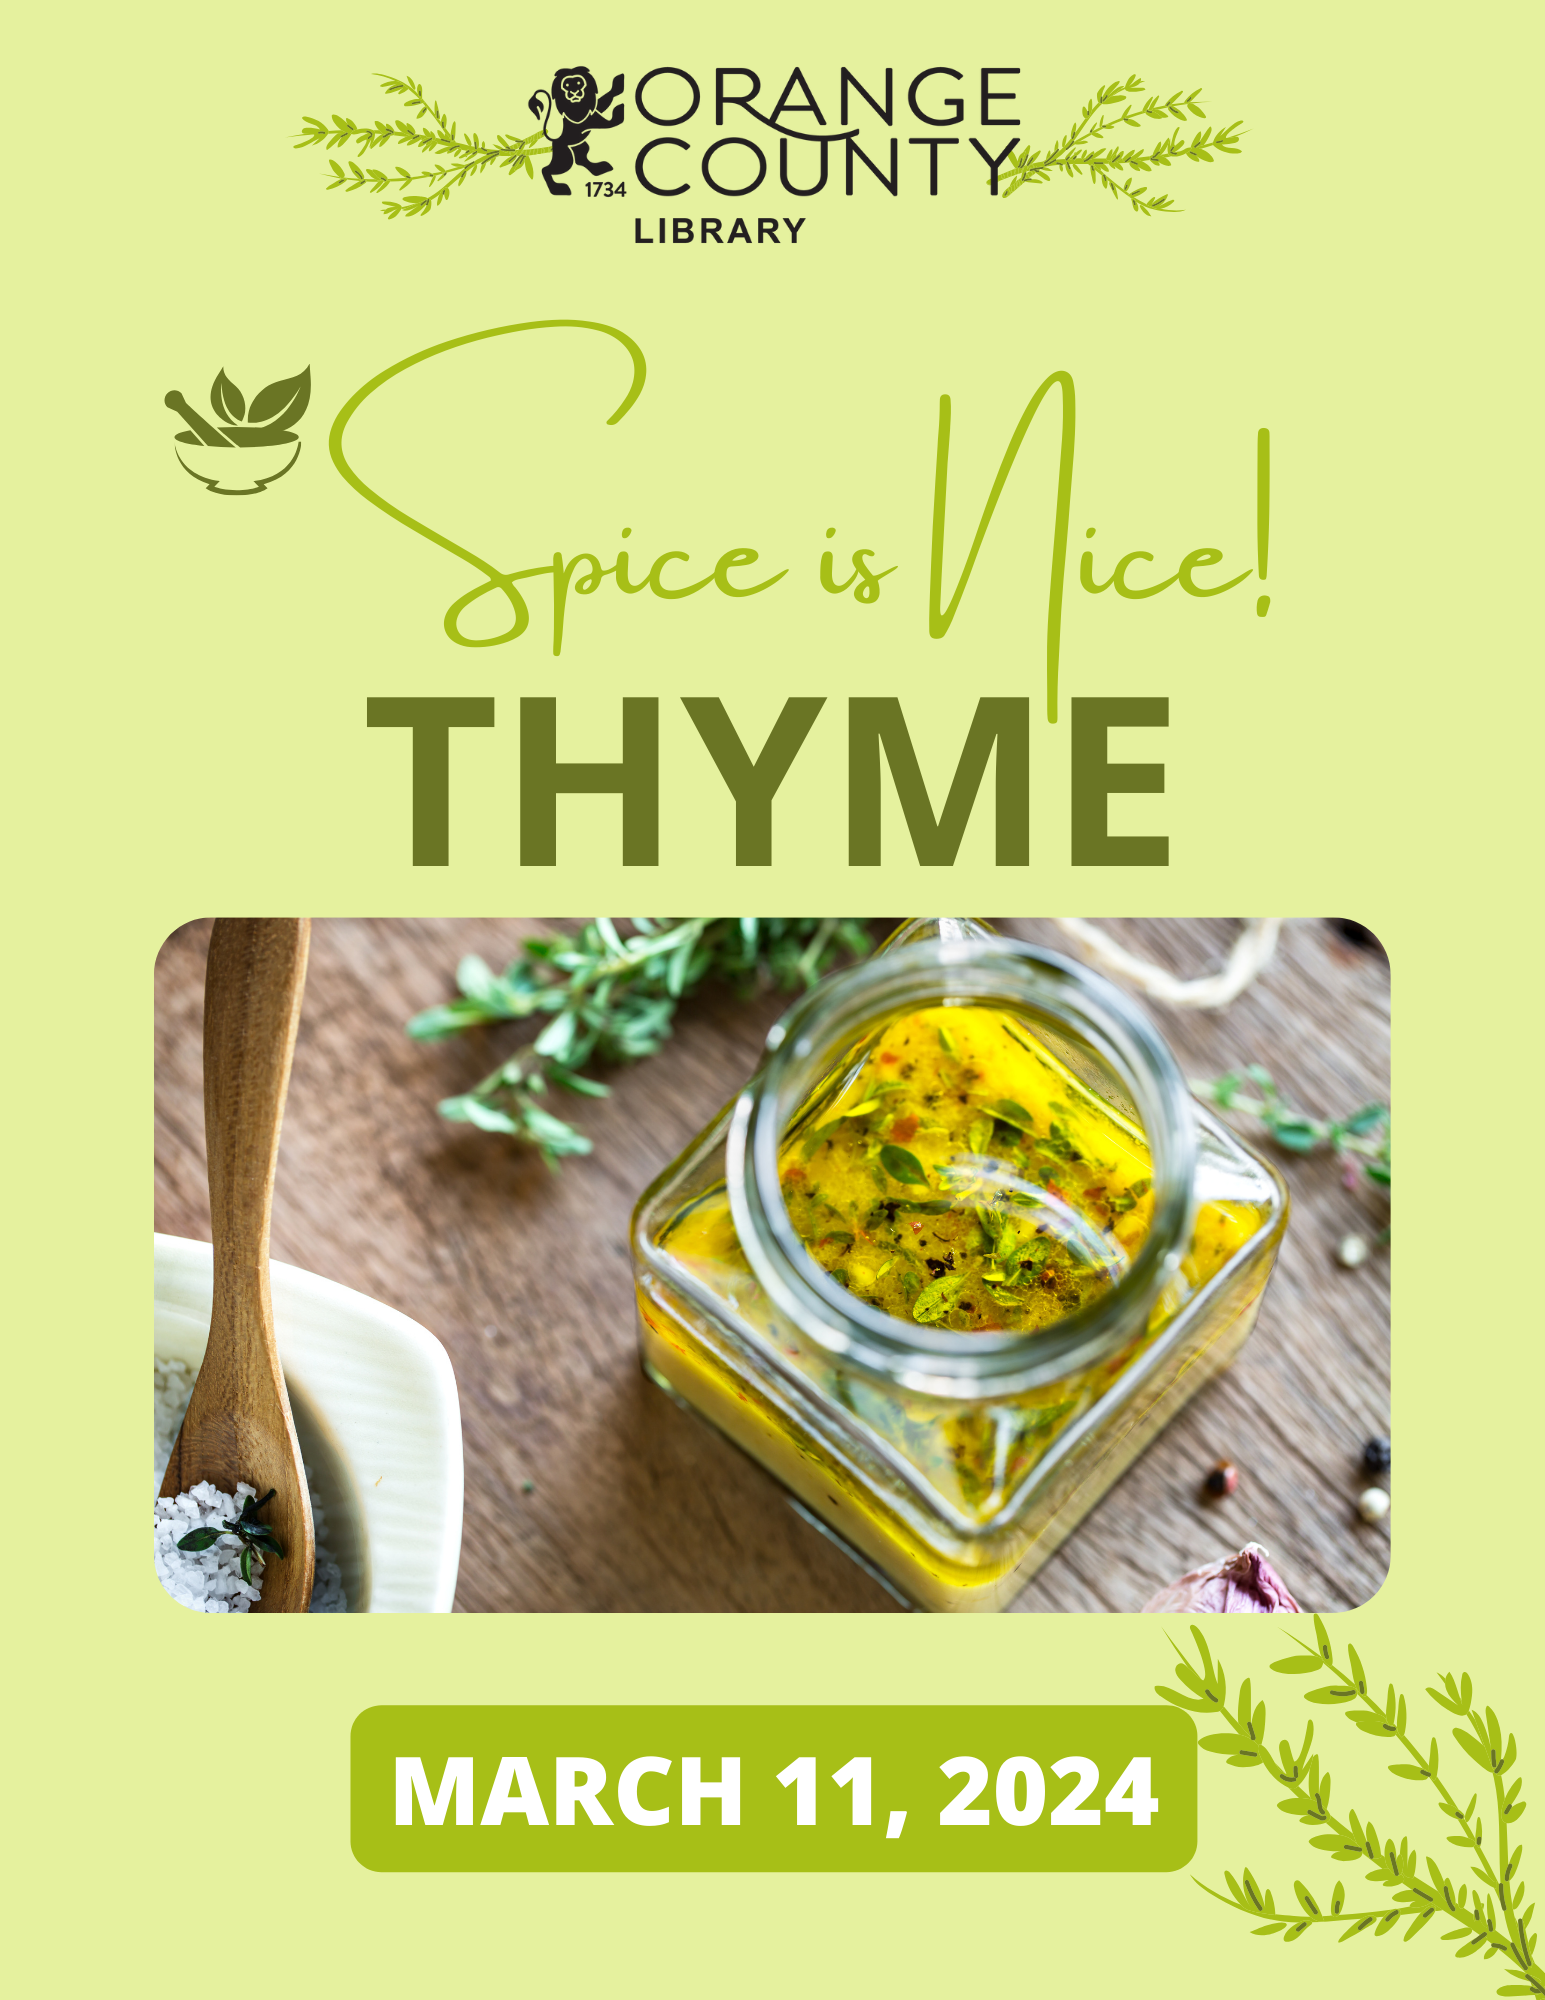 Spice is Nice: thyme March 11, 2024 Image of oil with thyme and some thyme leaves on the side.